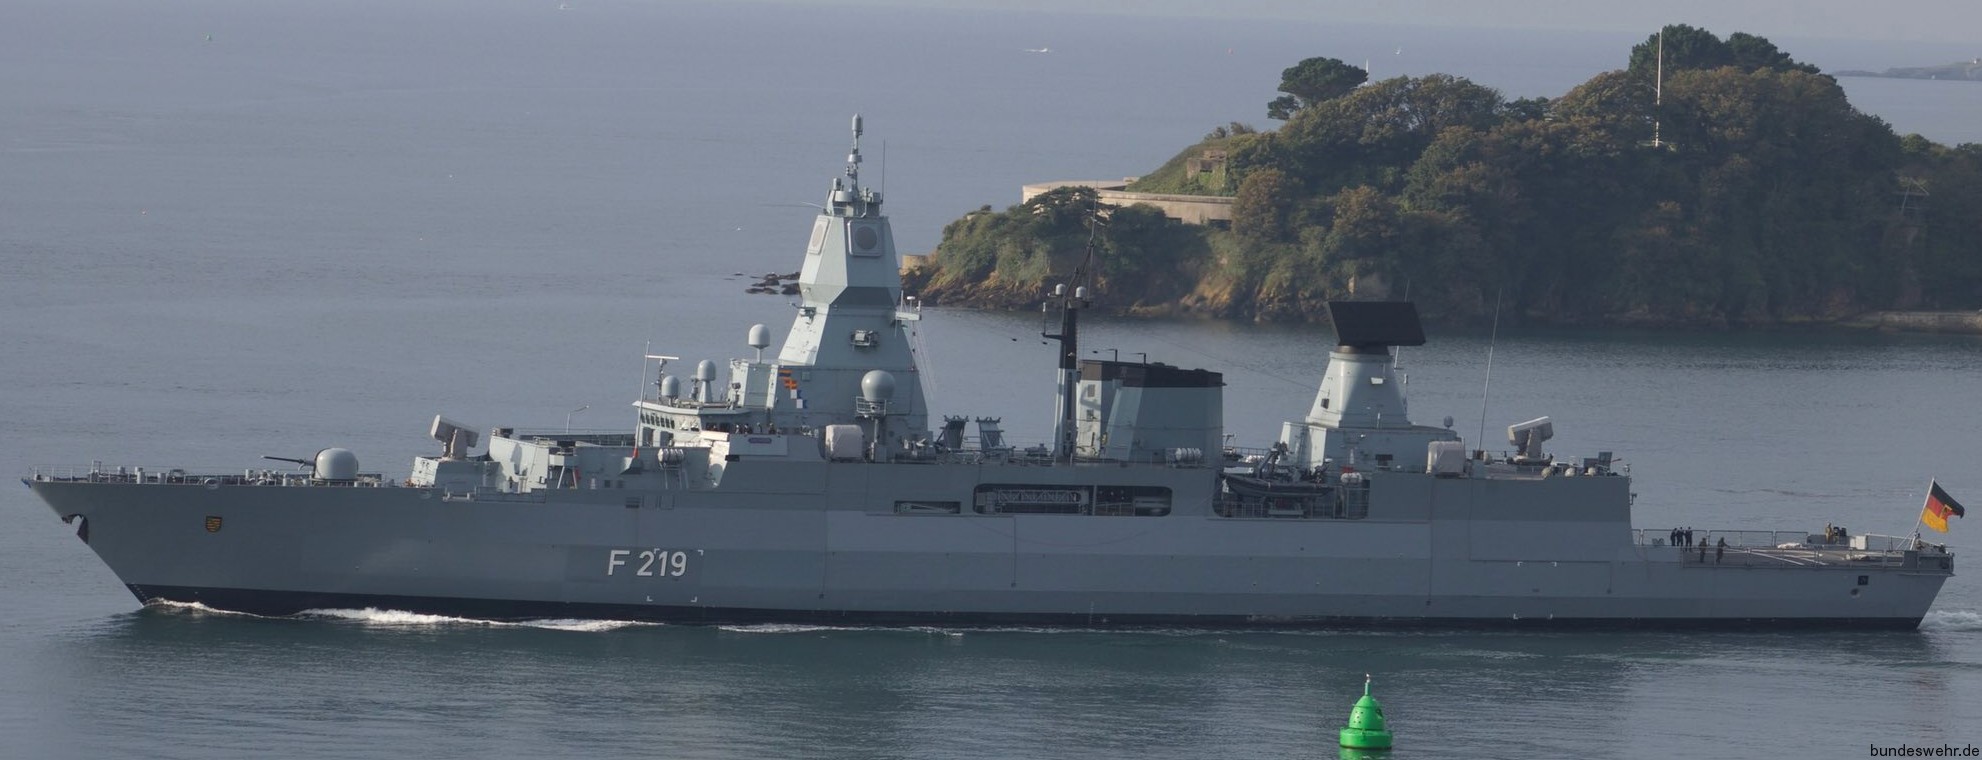 f-219 fgs sachsen type 124 class guided missile frigate ffg german navy marine fregatte 33